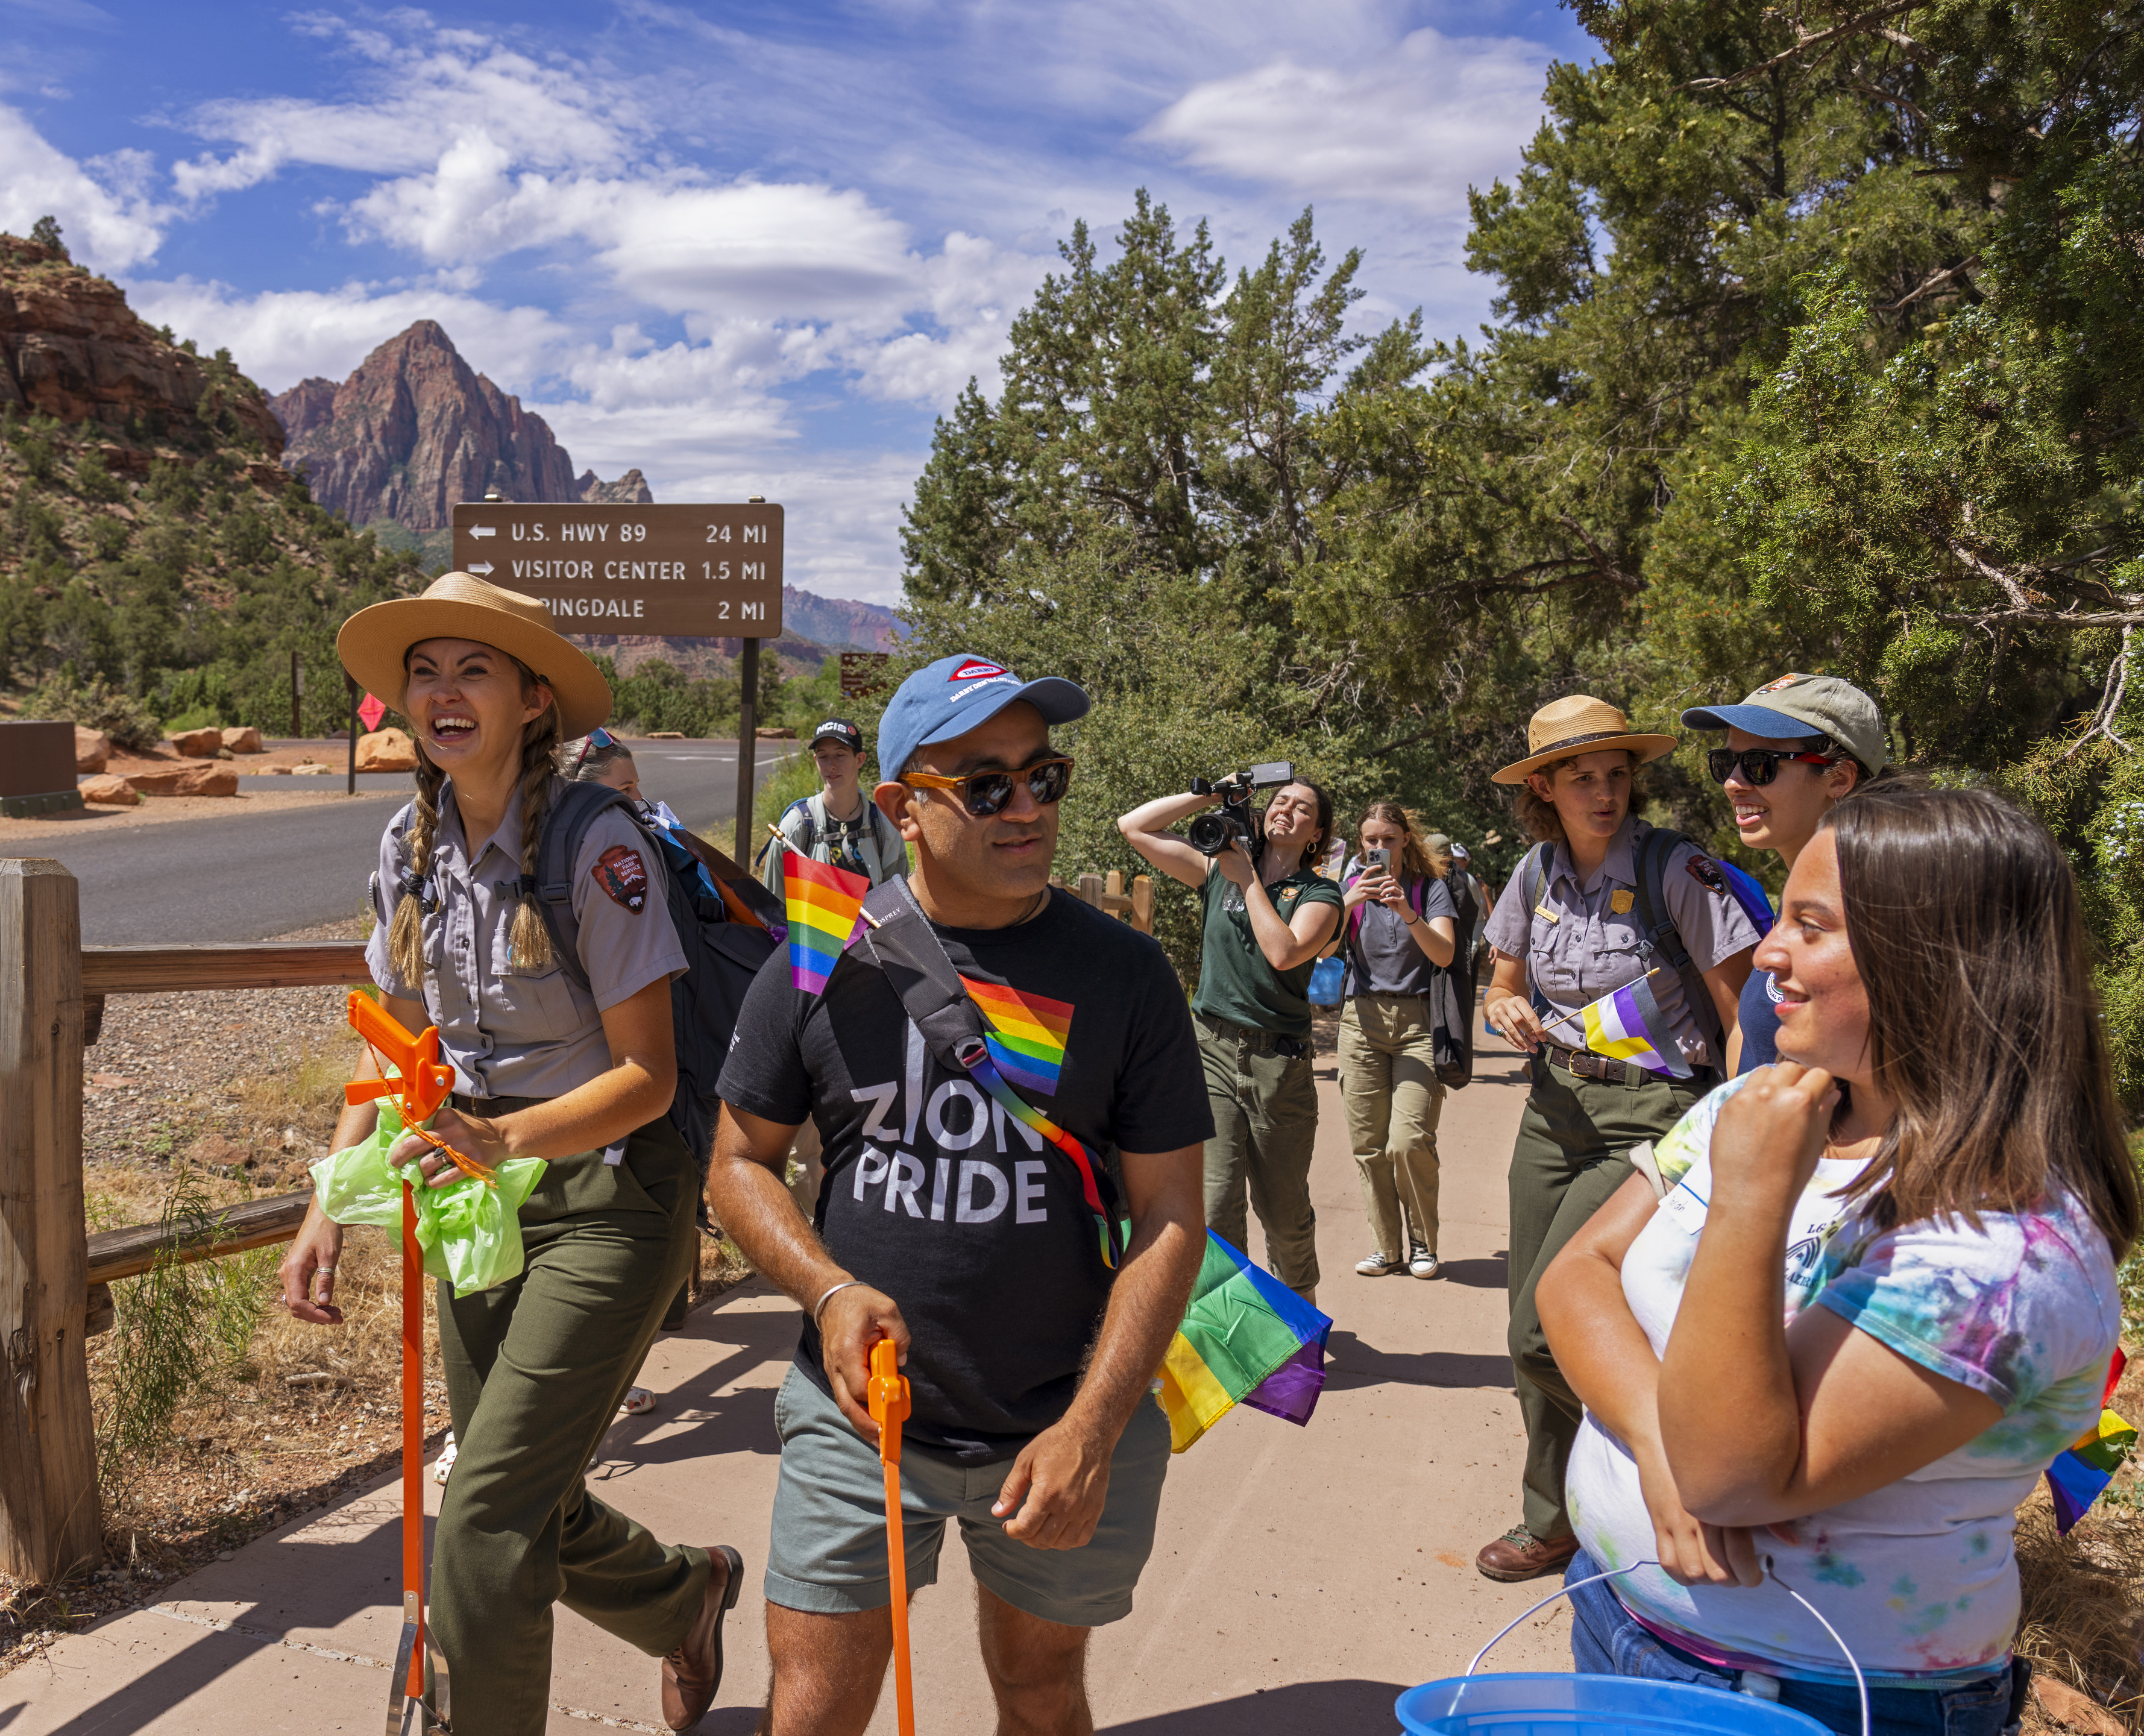 Zion National Park - The beloved iconic flat hat is a symbol of the NPS  rangers commitment to service and dedication that they bring to their jobs.  We wear it with pride